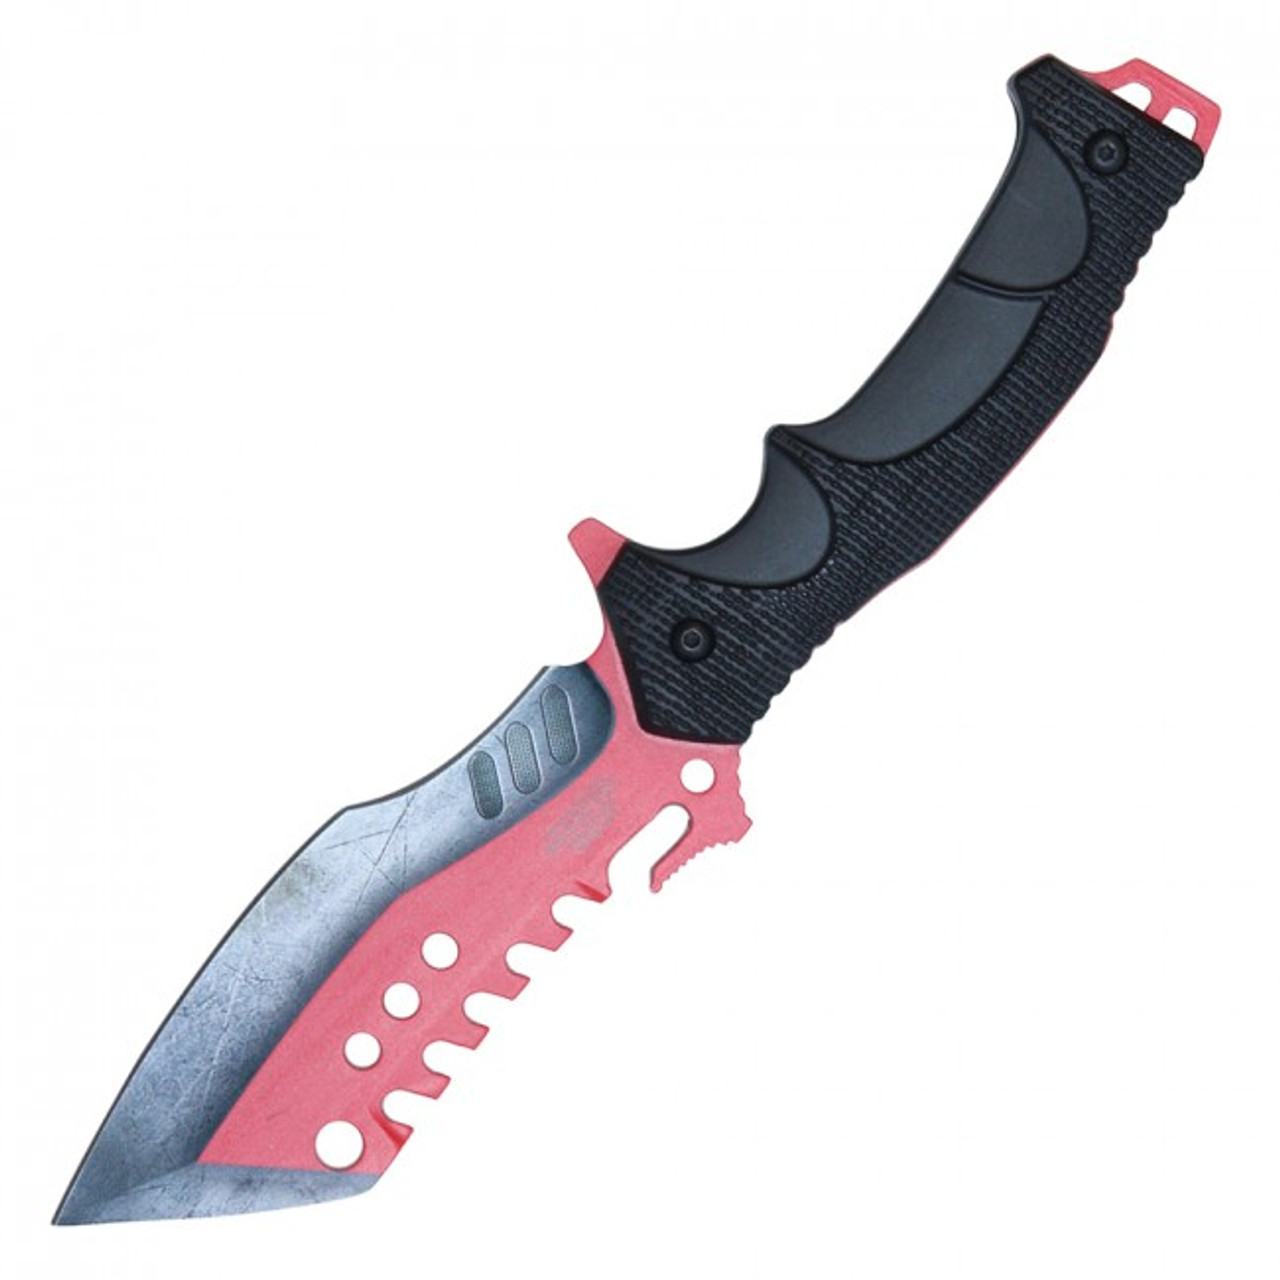 9 1/2” FIXED BLADE HUNTING KNIFE - RED